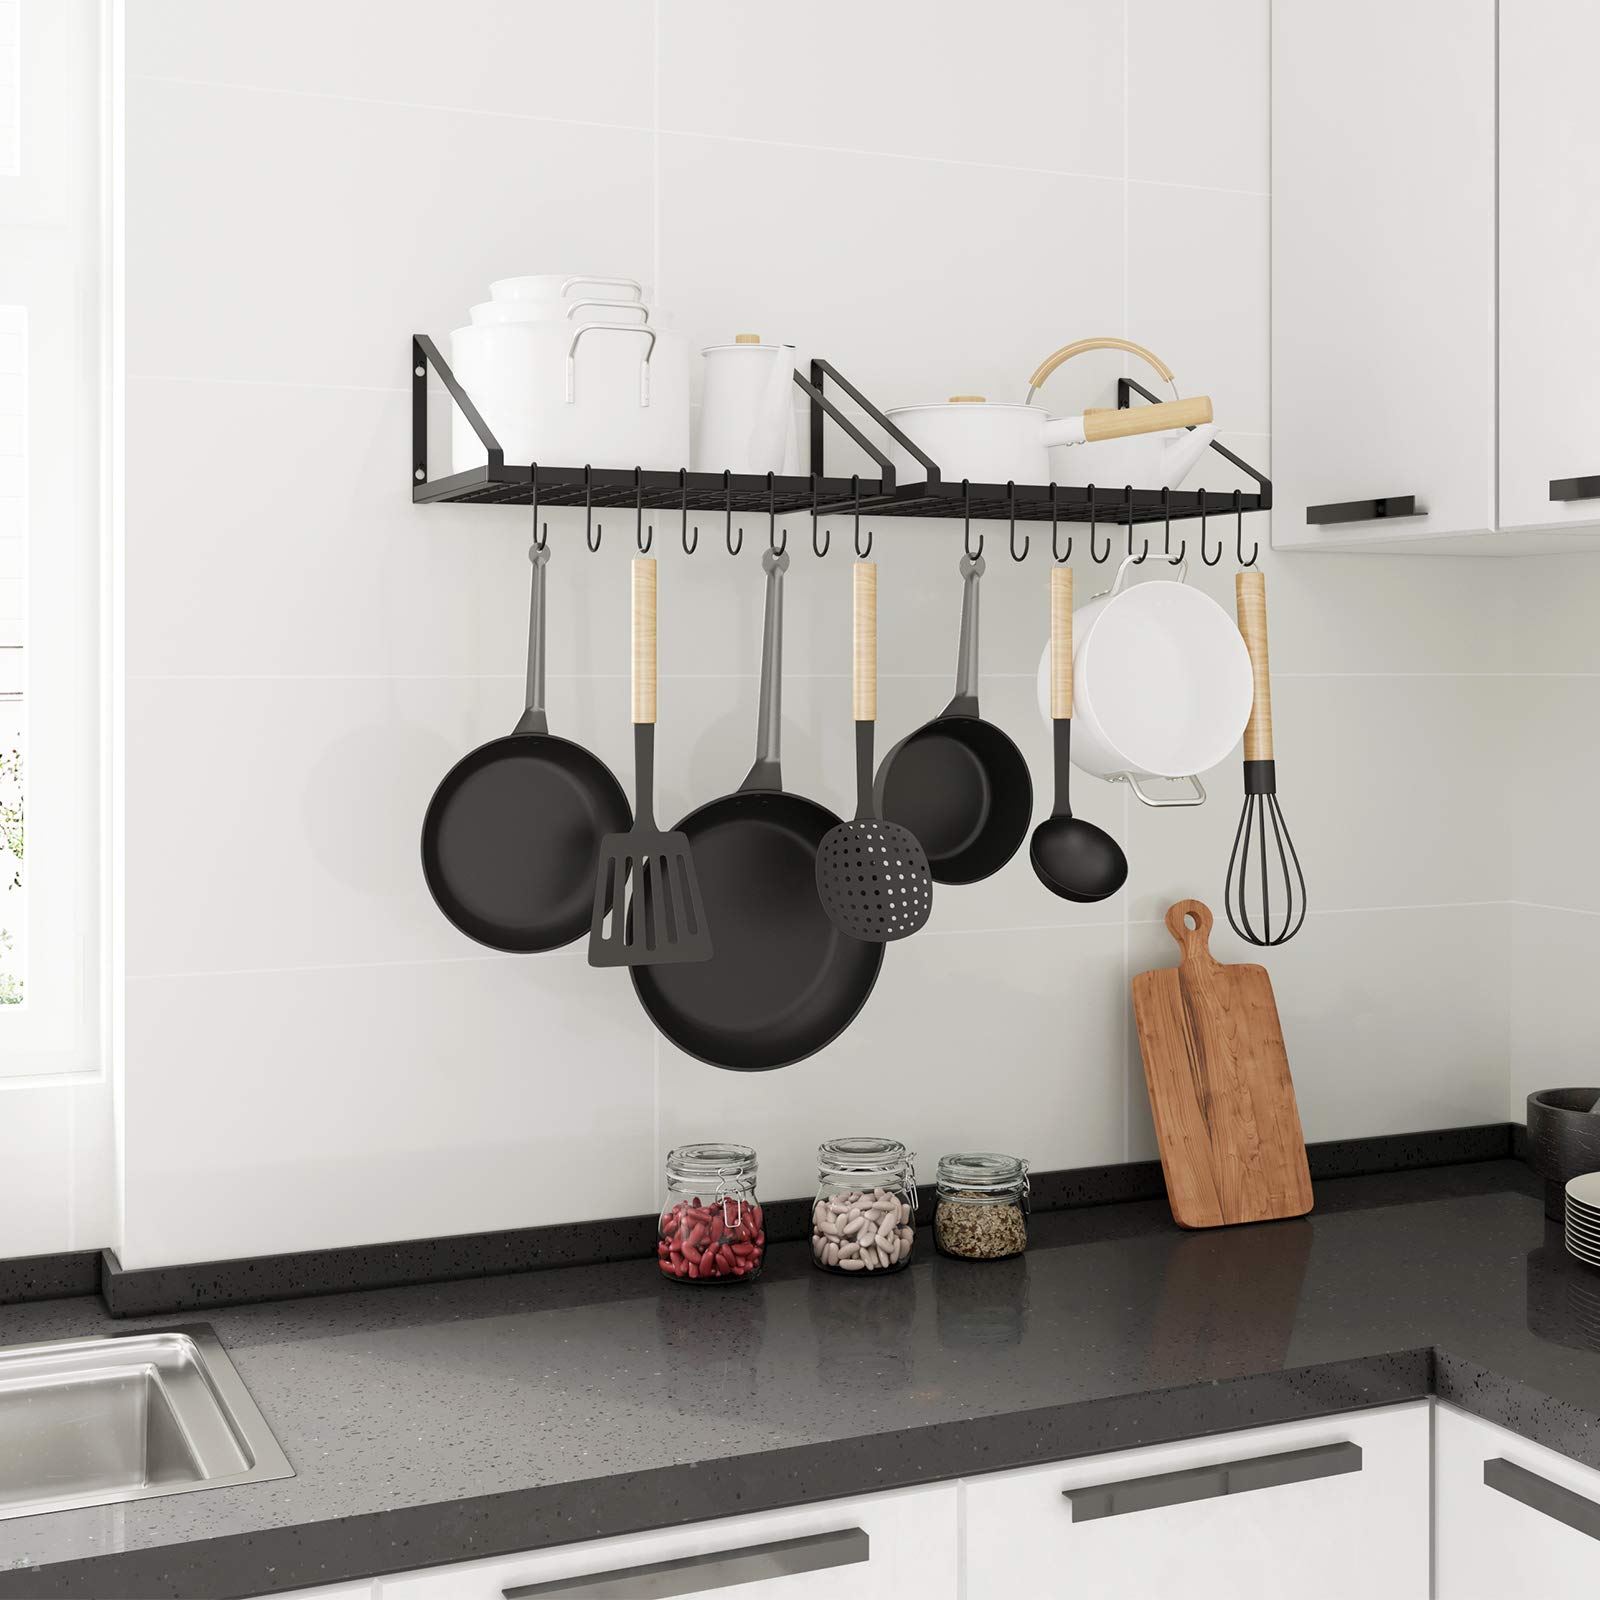 OROPY Pot and Pan Hanging Rack Wall Mounted Set of 2, Kitchen Wall Organizer Storage Shelves for Utensils, Cookware with 16 S Hooks